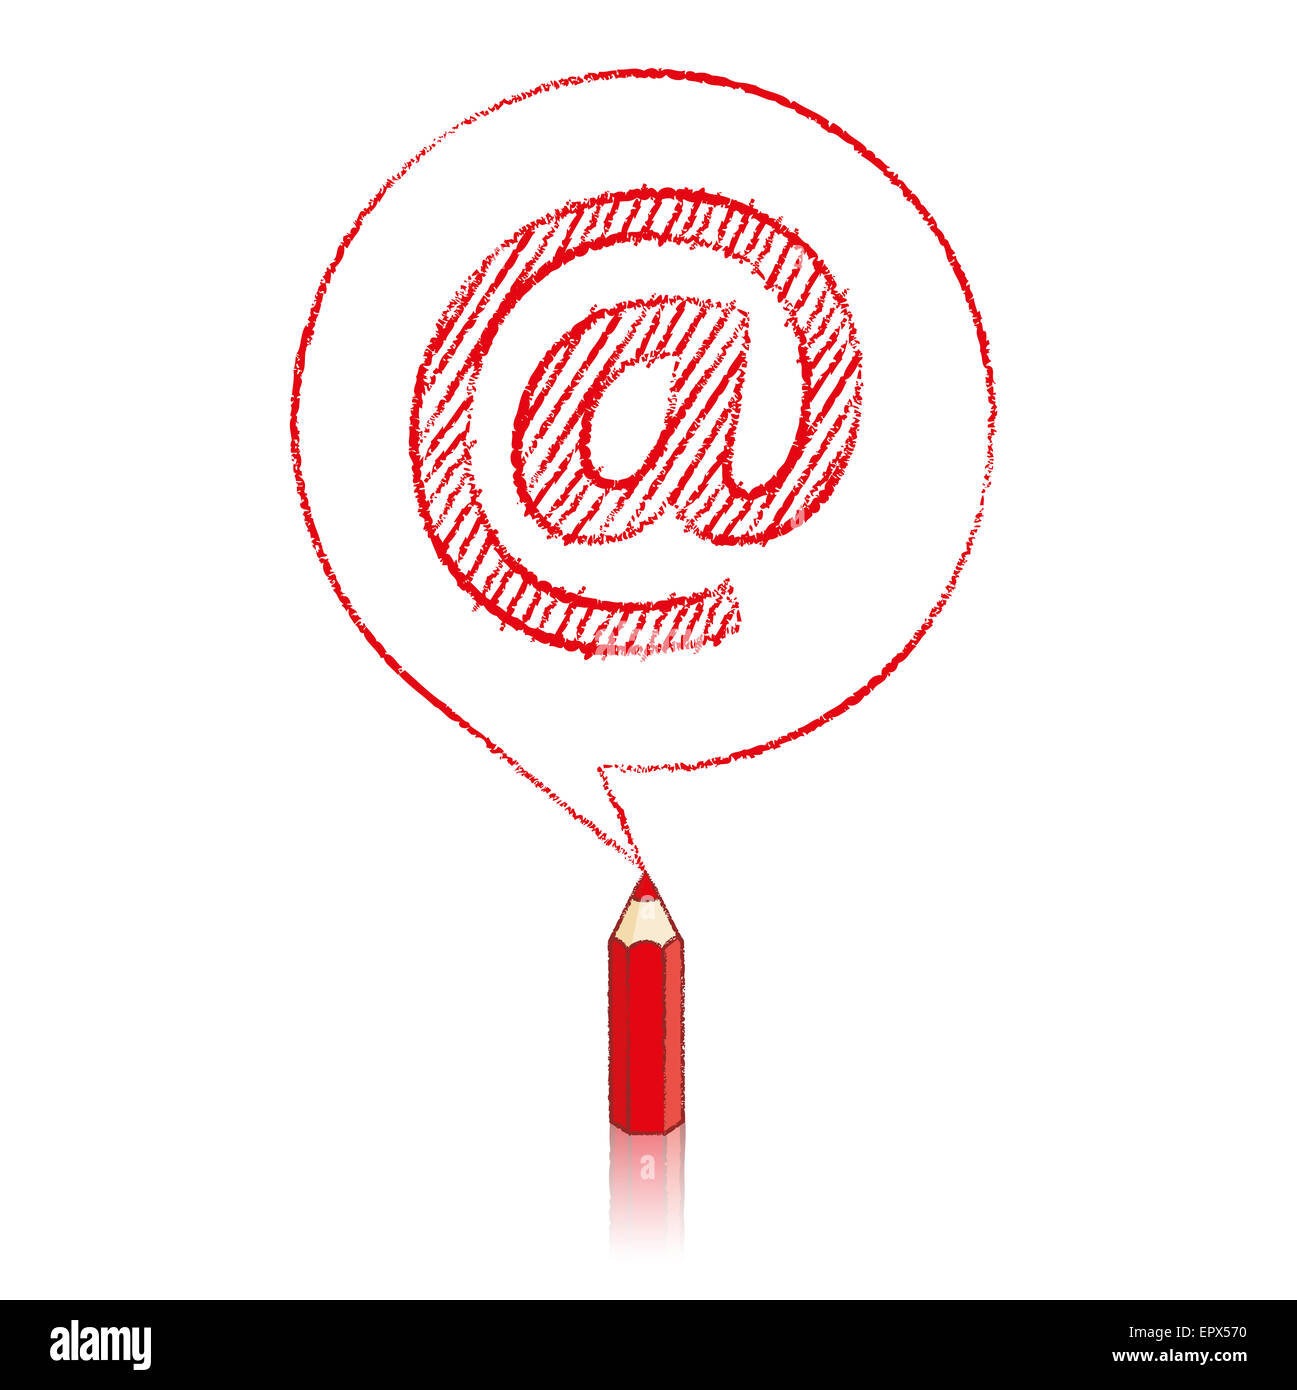 Red Pencil with Reflection Drawing a shaded At sign in Round Speech Bubble on White Background Stock Photo